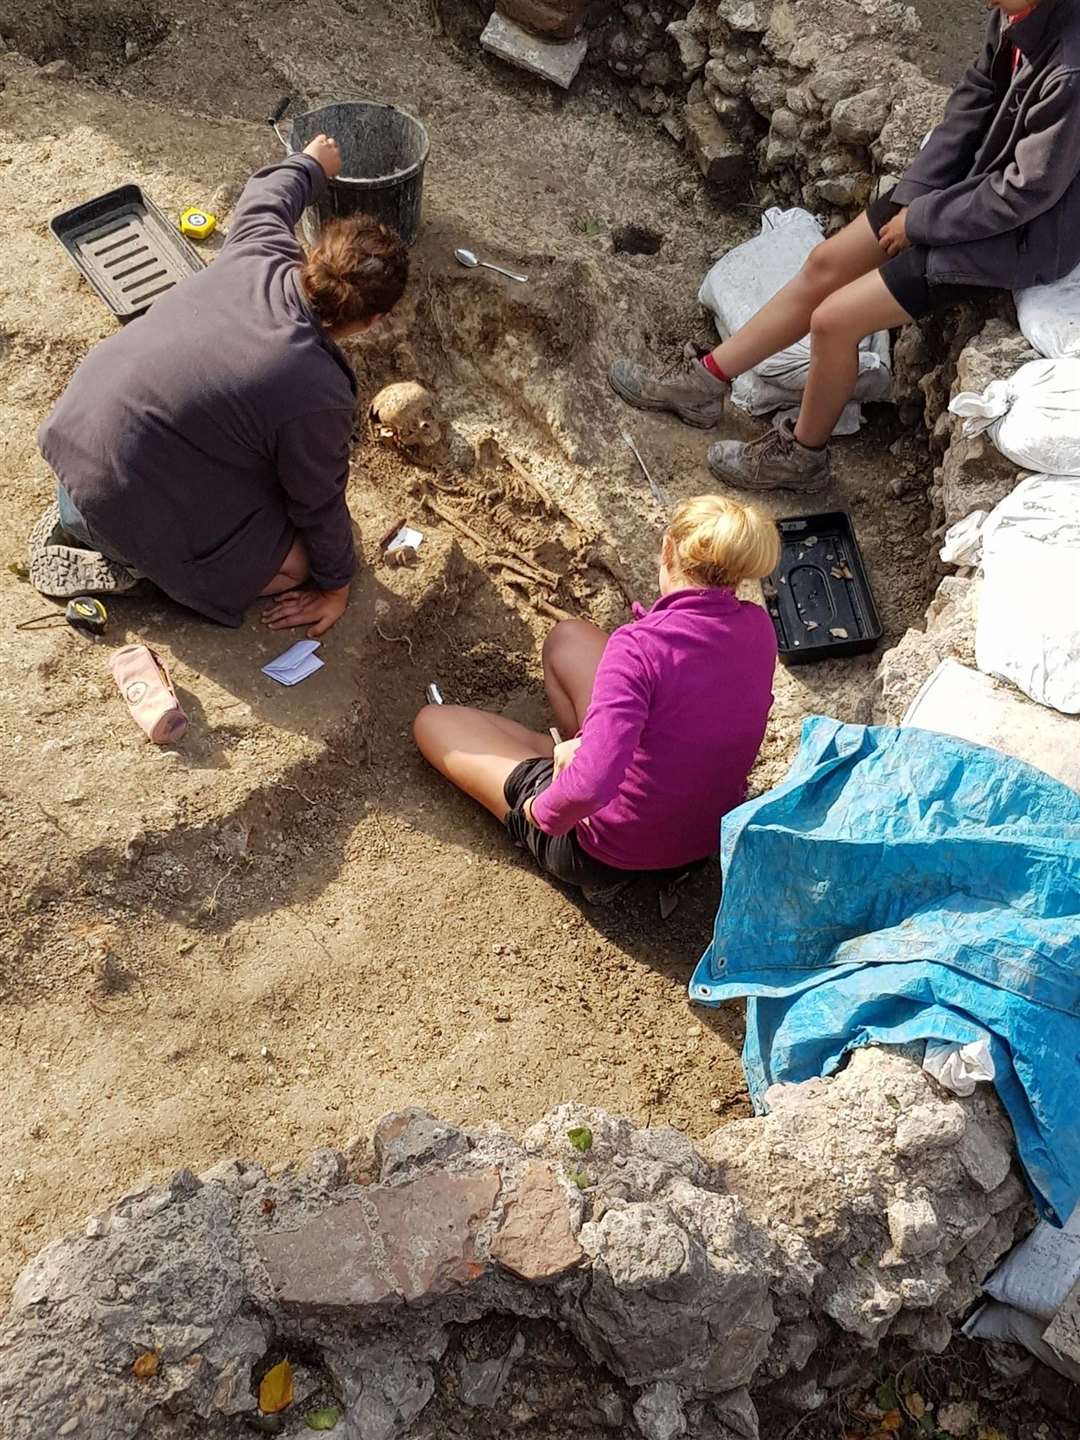 University of Reading PhD student Lisa Backhouse, and undergraduates Zoe Wiacek and Emily Gibson working on the remains. Photo: Pathways to the Past (14652558)